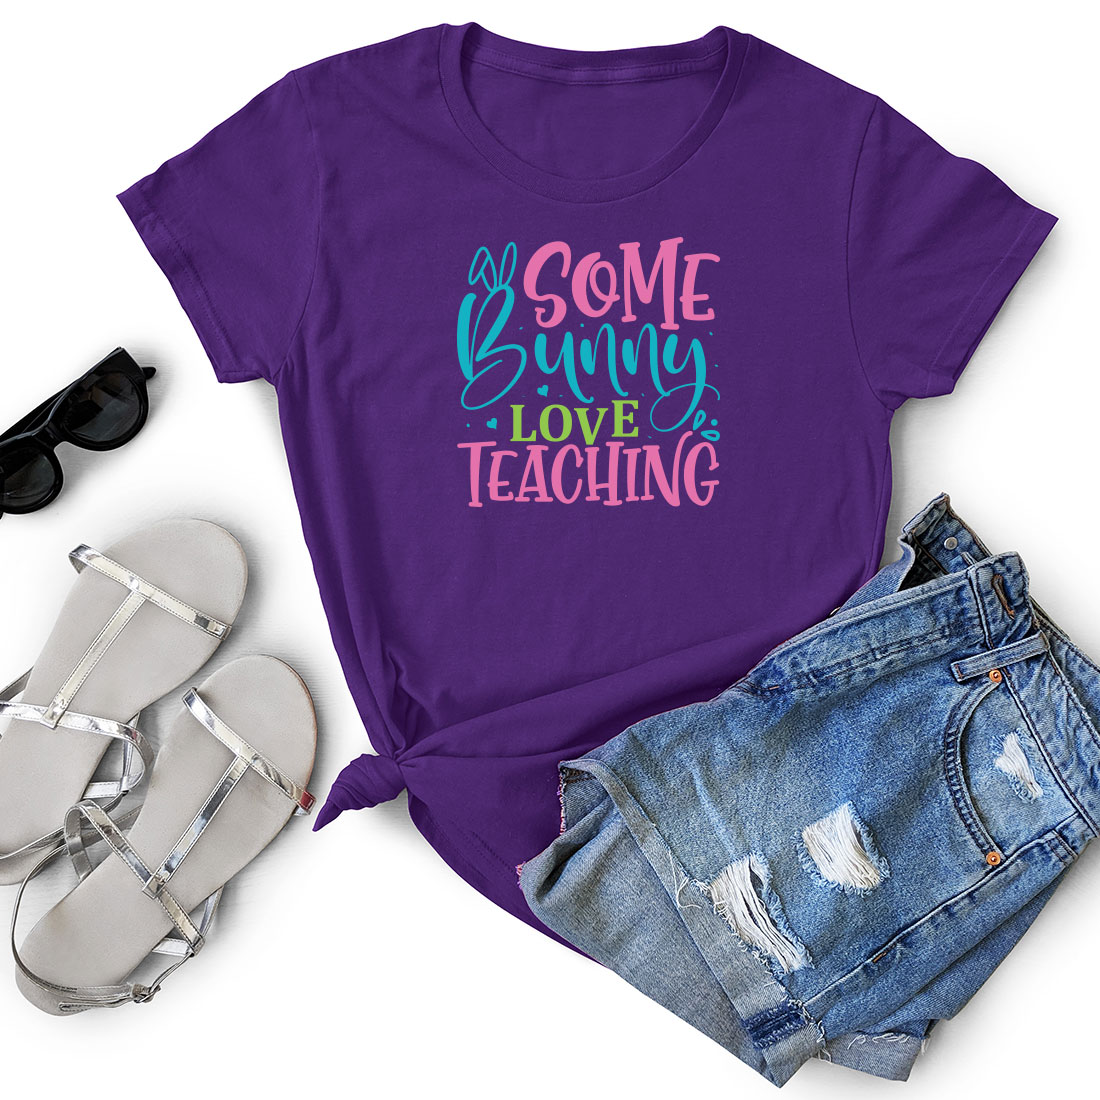 T - shirt that says some bunny love teaching.